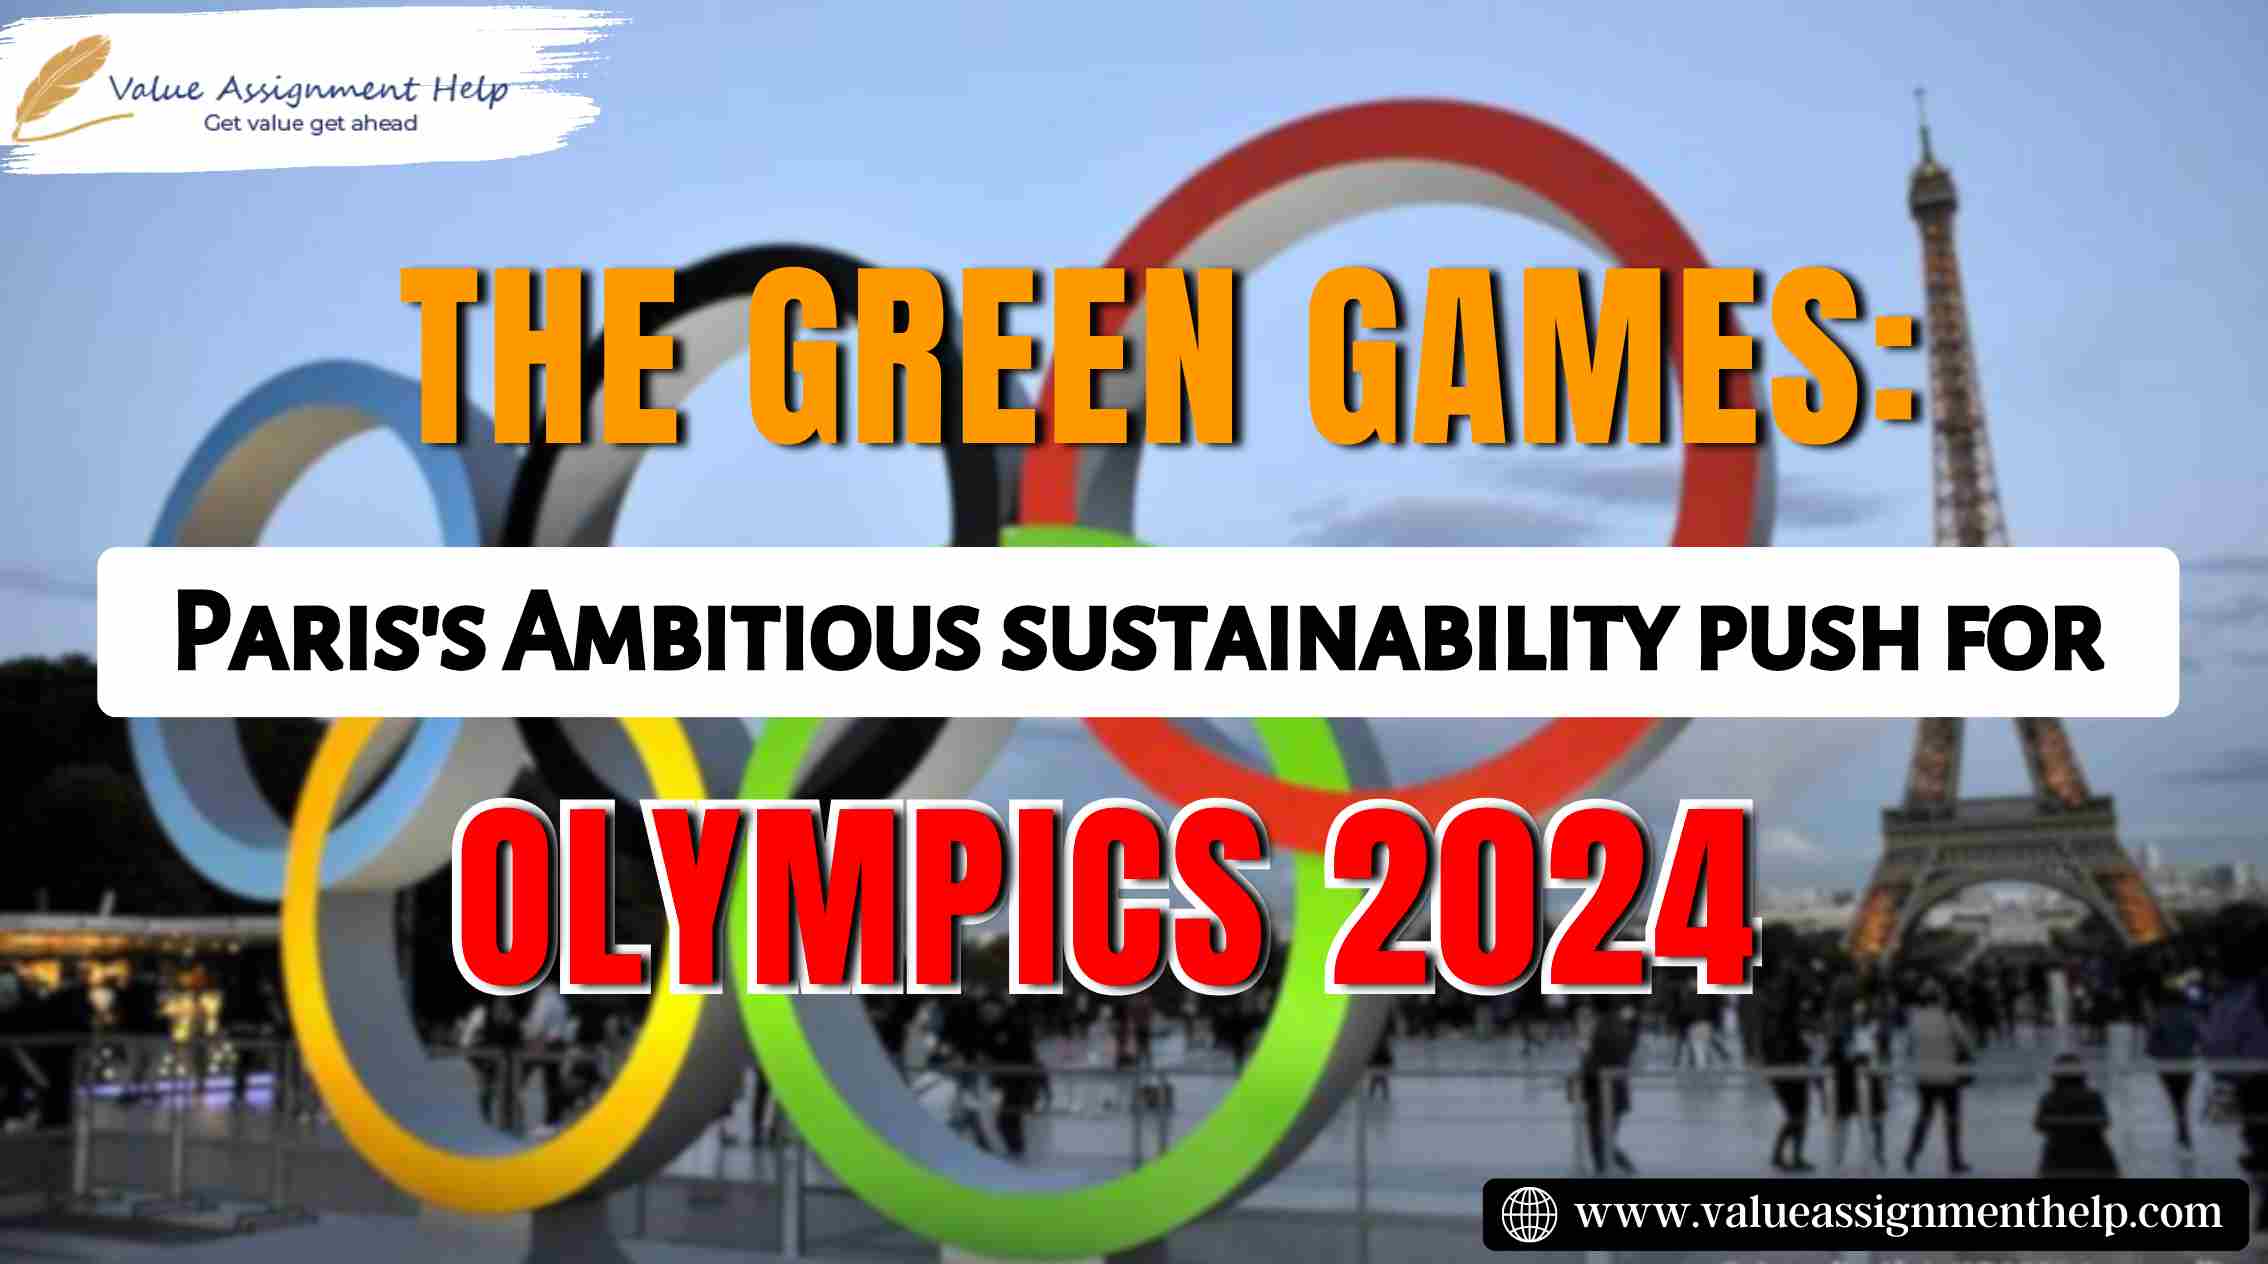  The Green Games: Paris’s Ambitious Sustainability Push in Olympics 2024